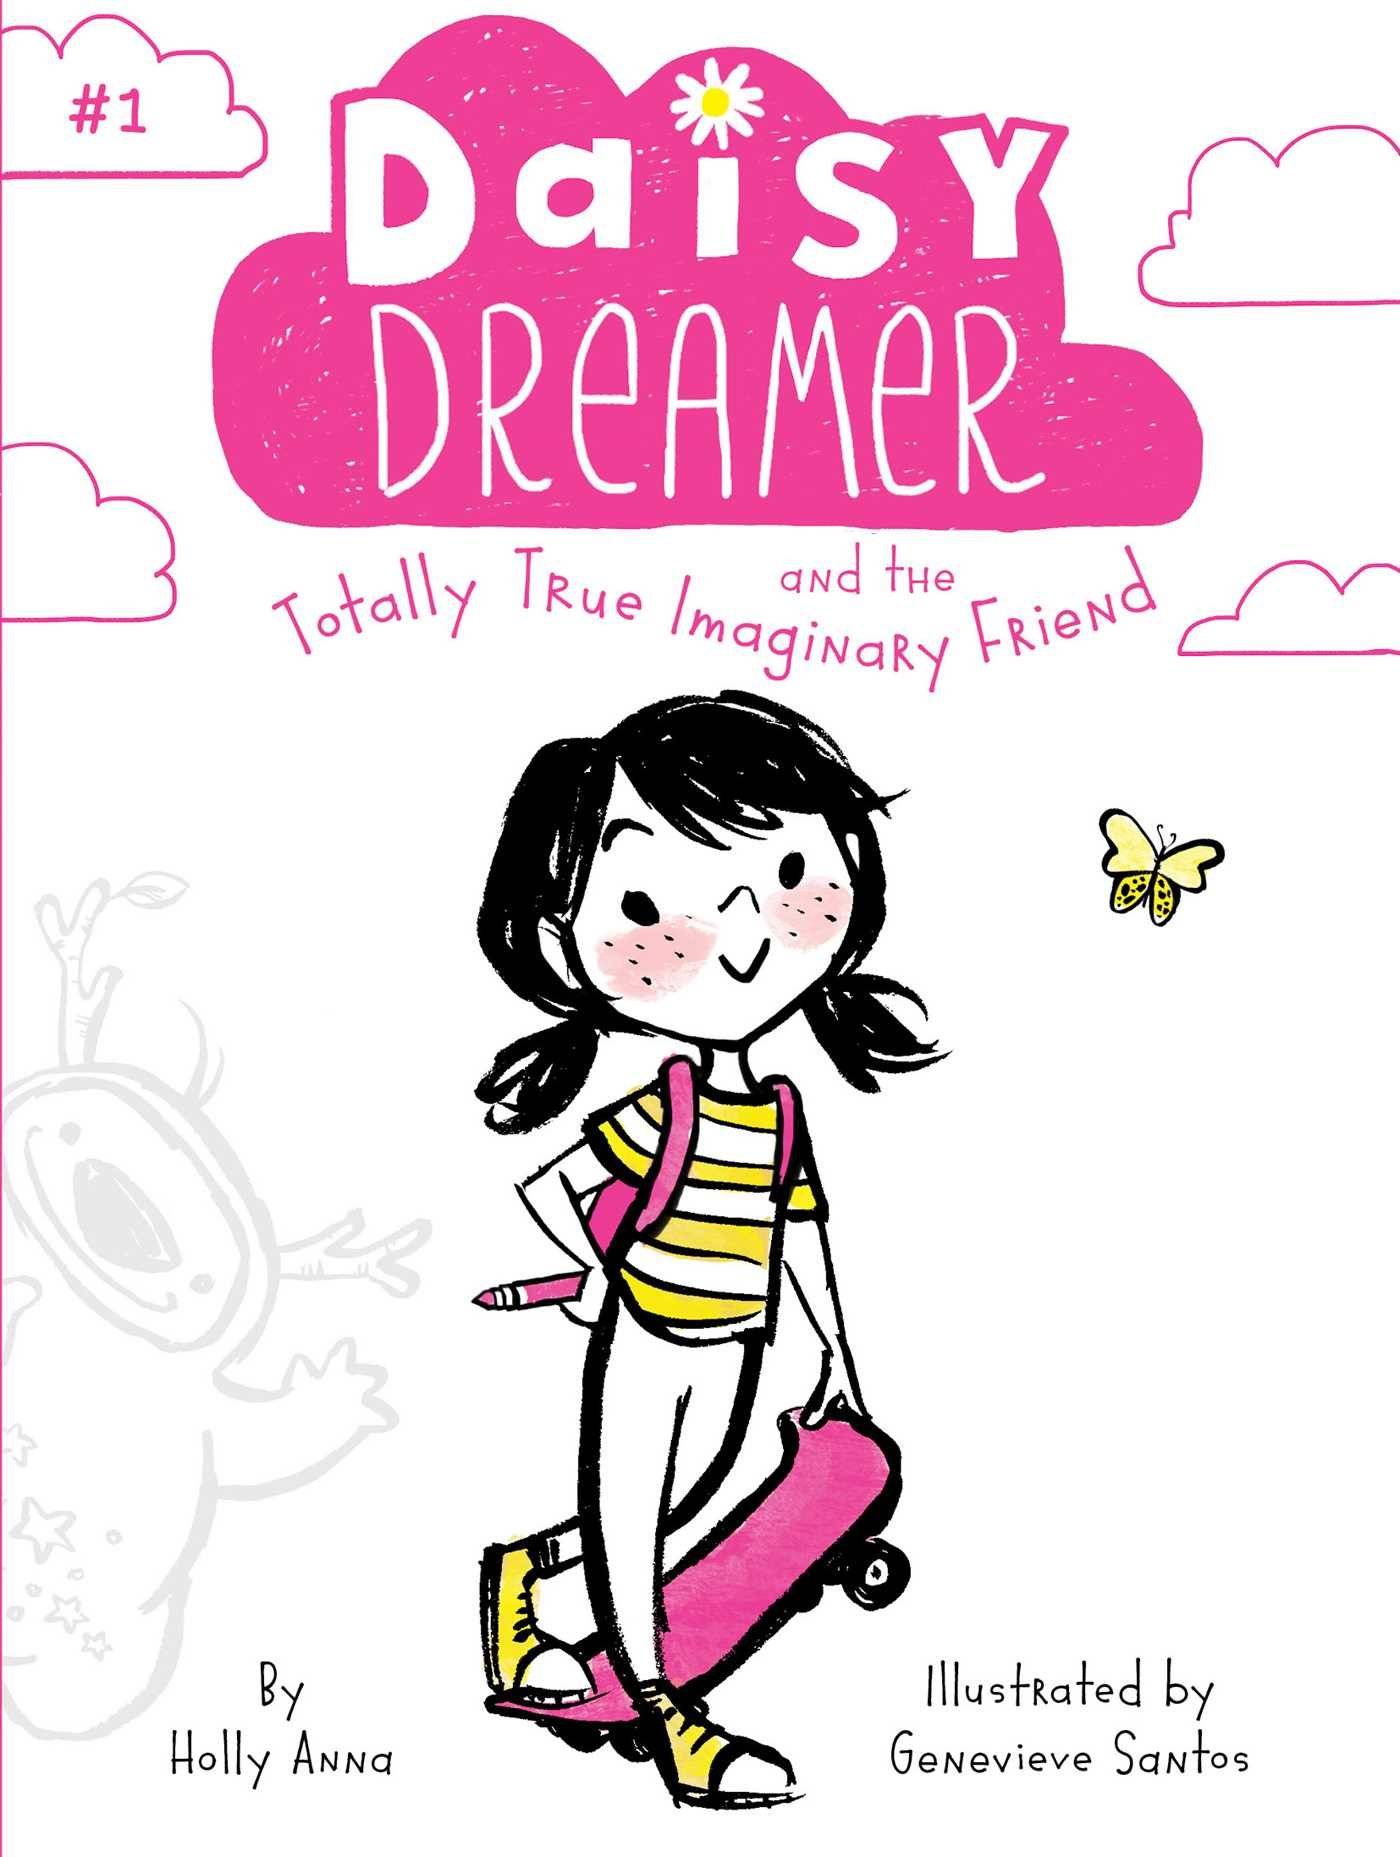 IMG : Daisy dreamer and the totally true imaginary friend #1